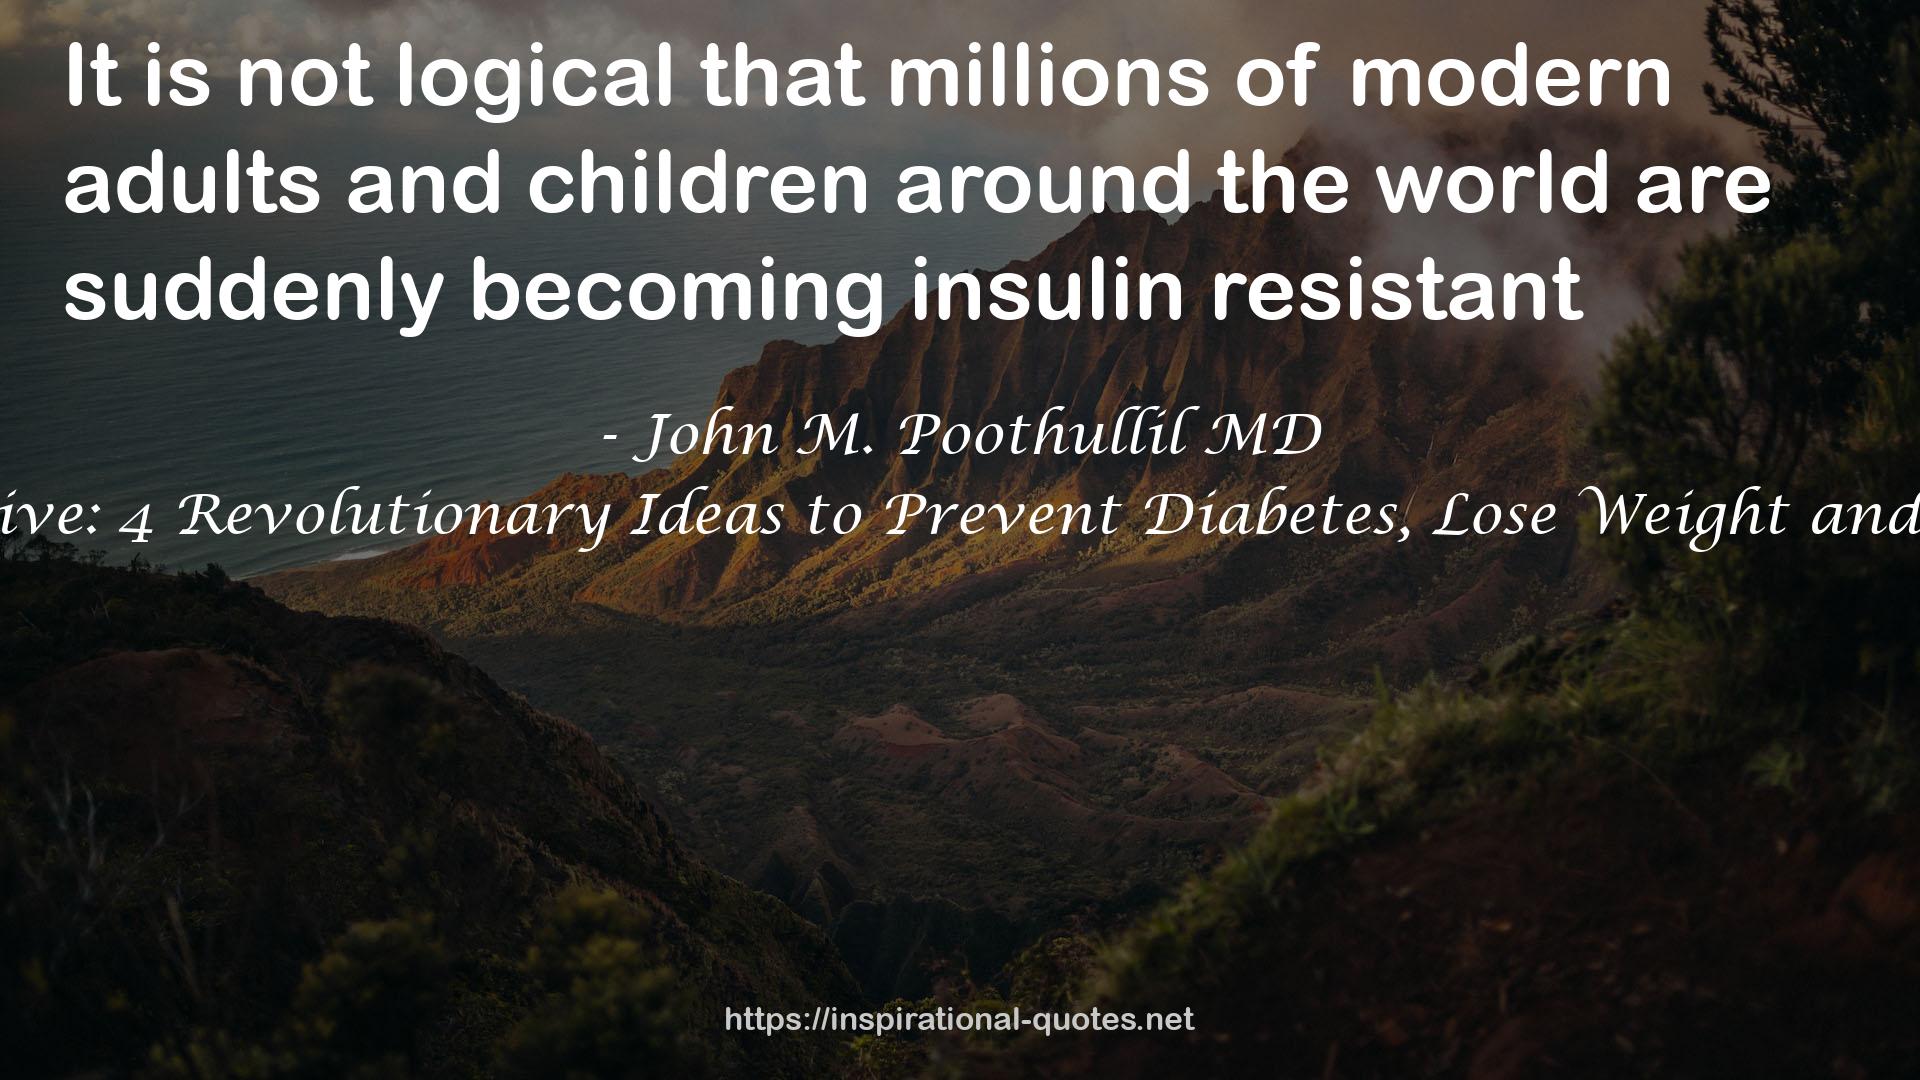 John M. Poothullil MD QUOTES